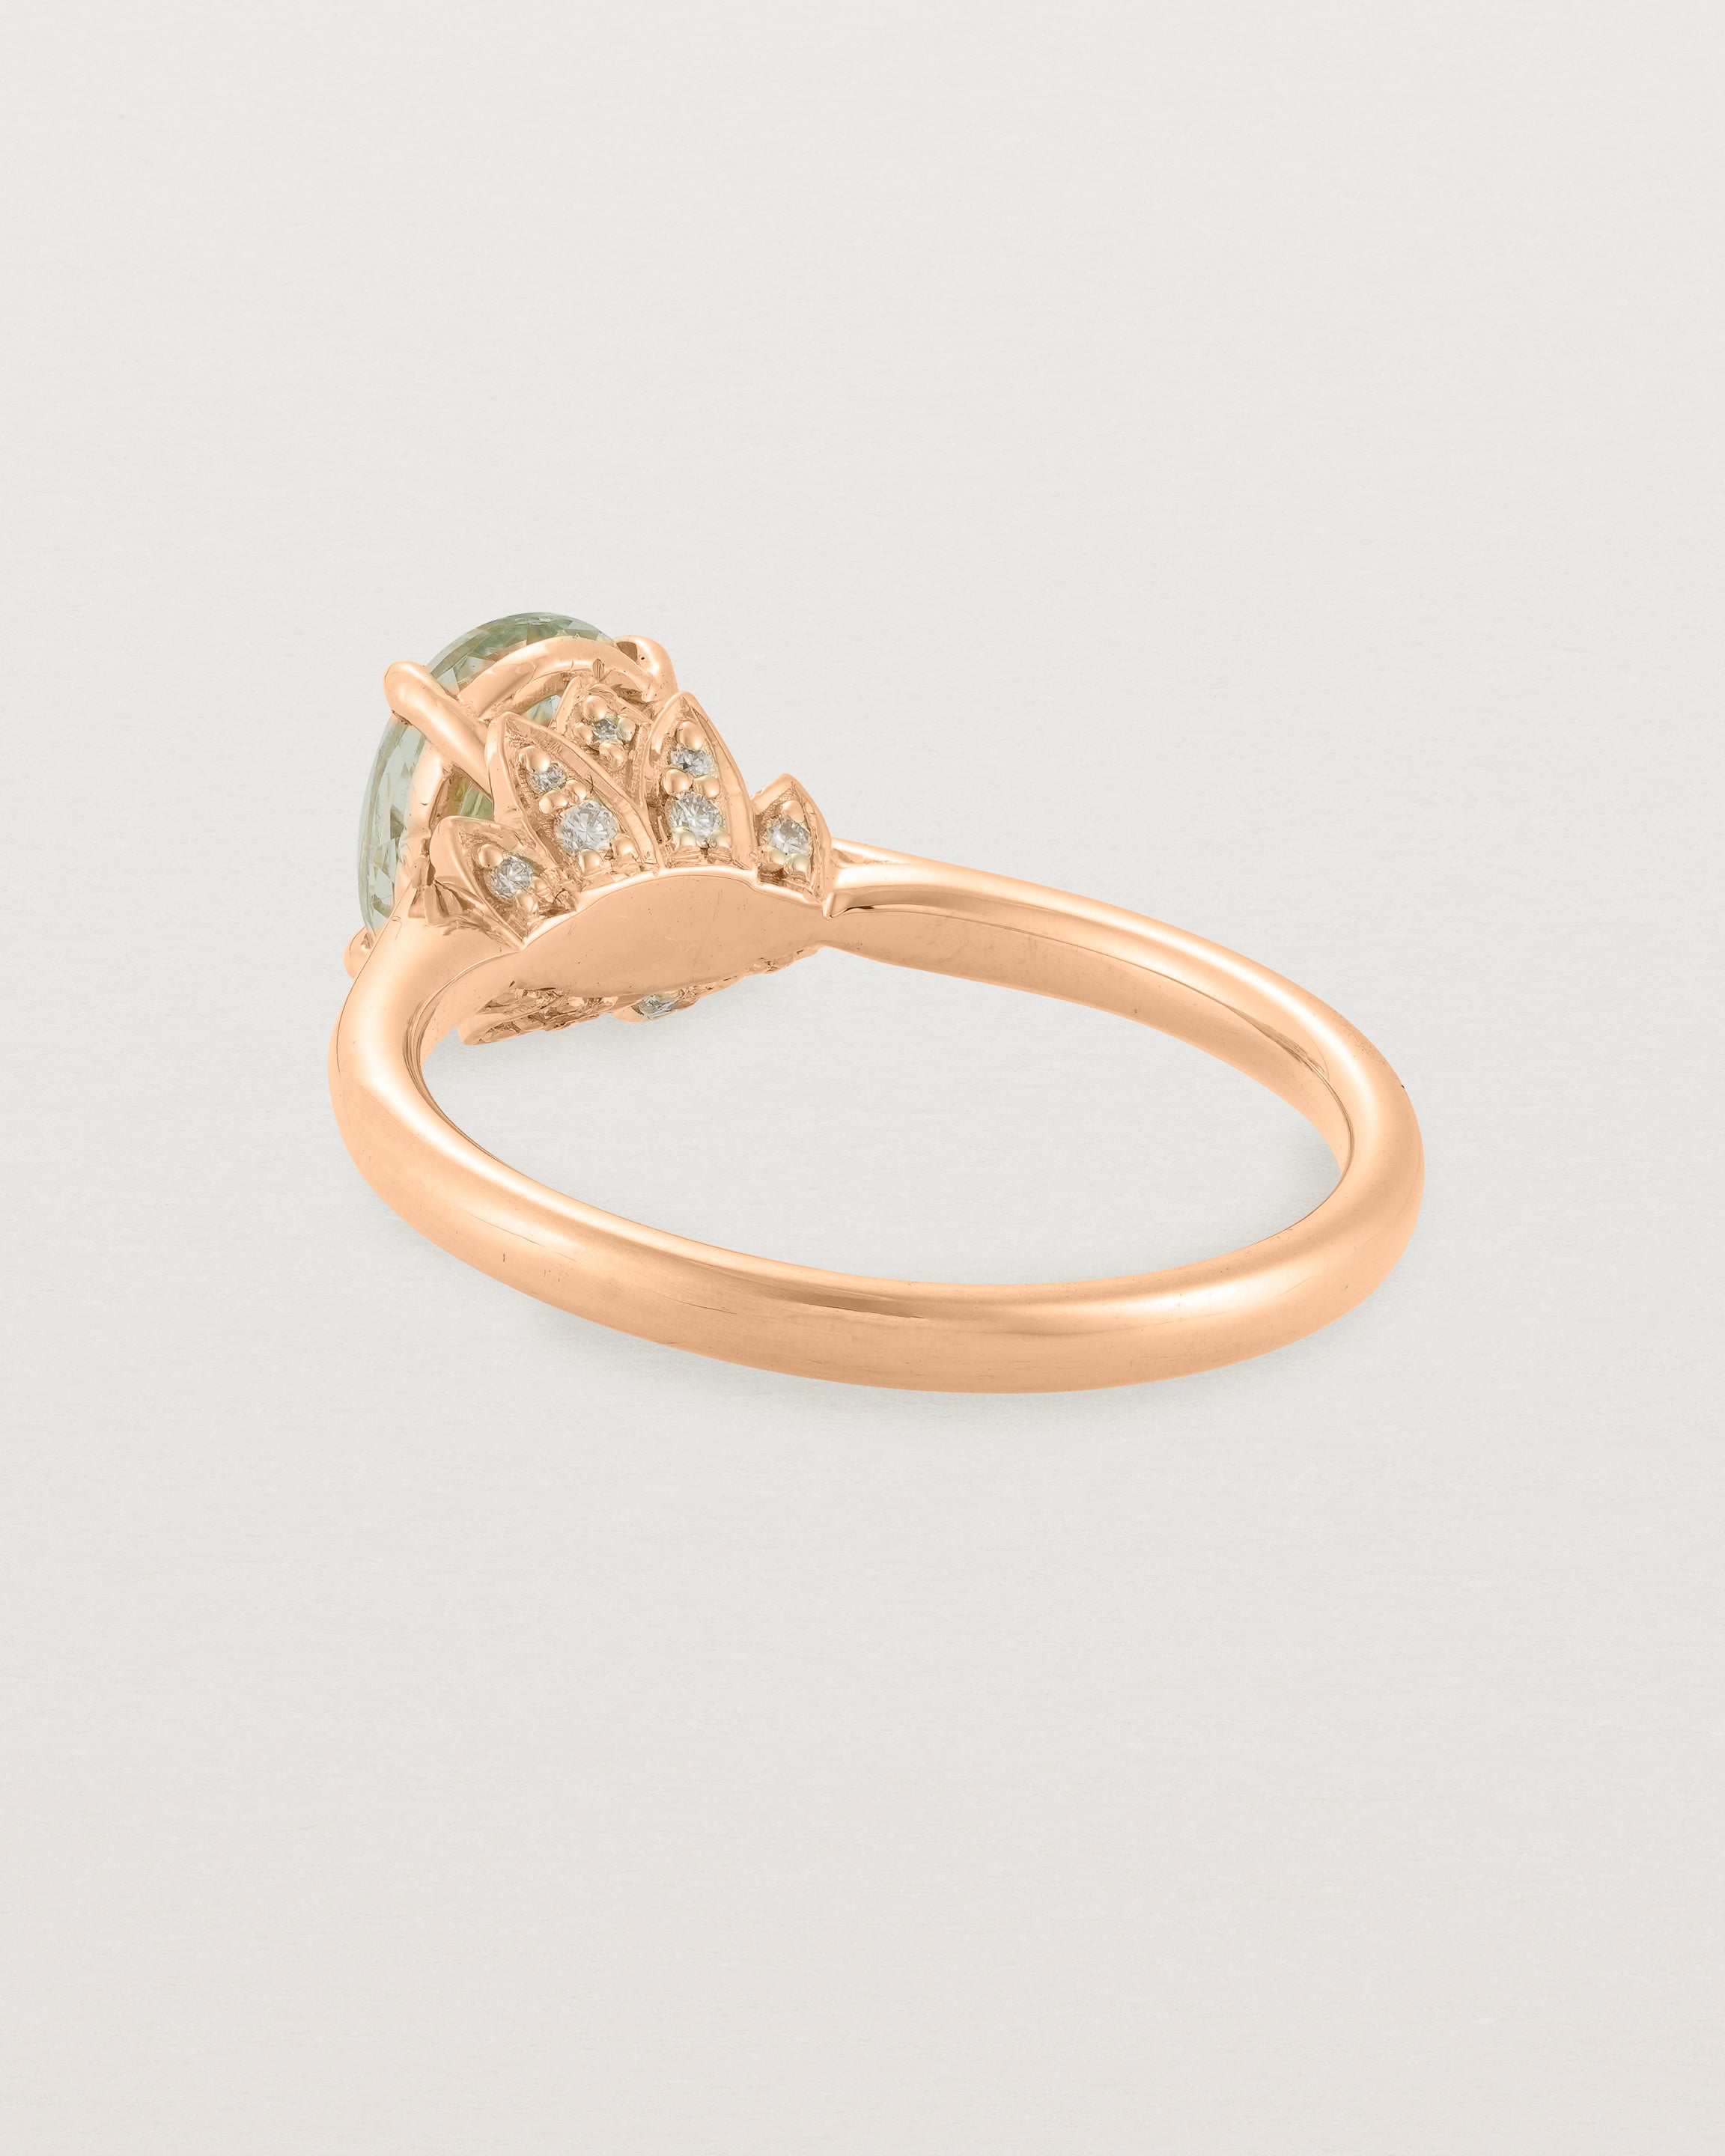 Back view of the Kalina Oval Solitaire | Green Amethyst | Rose Gold.